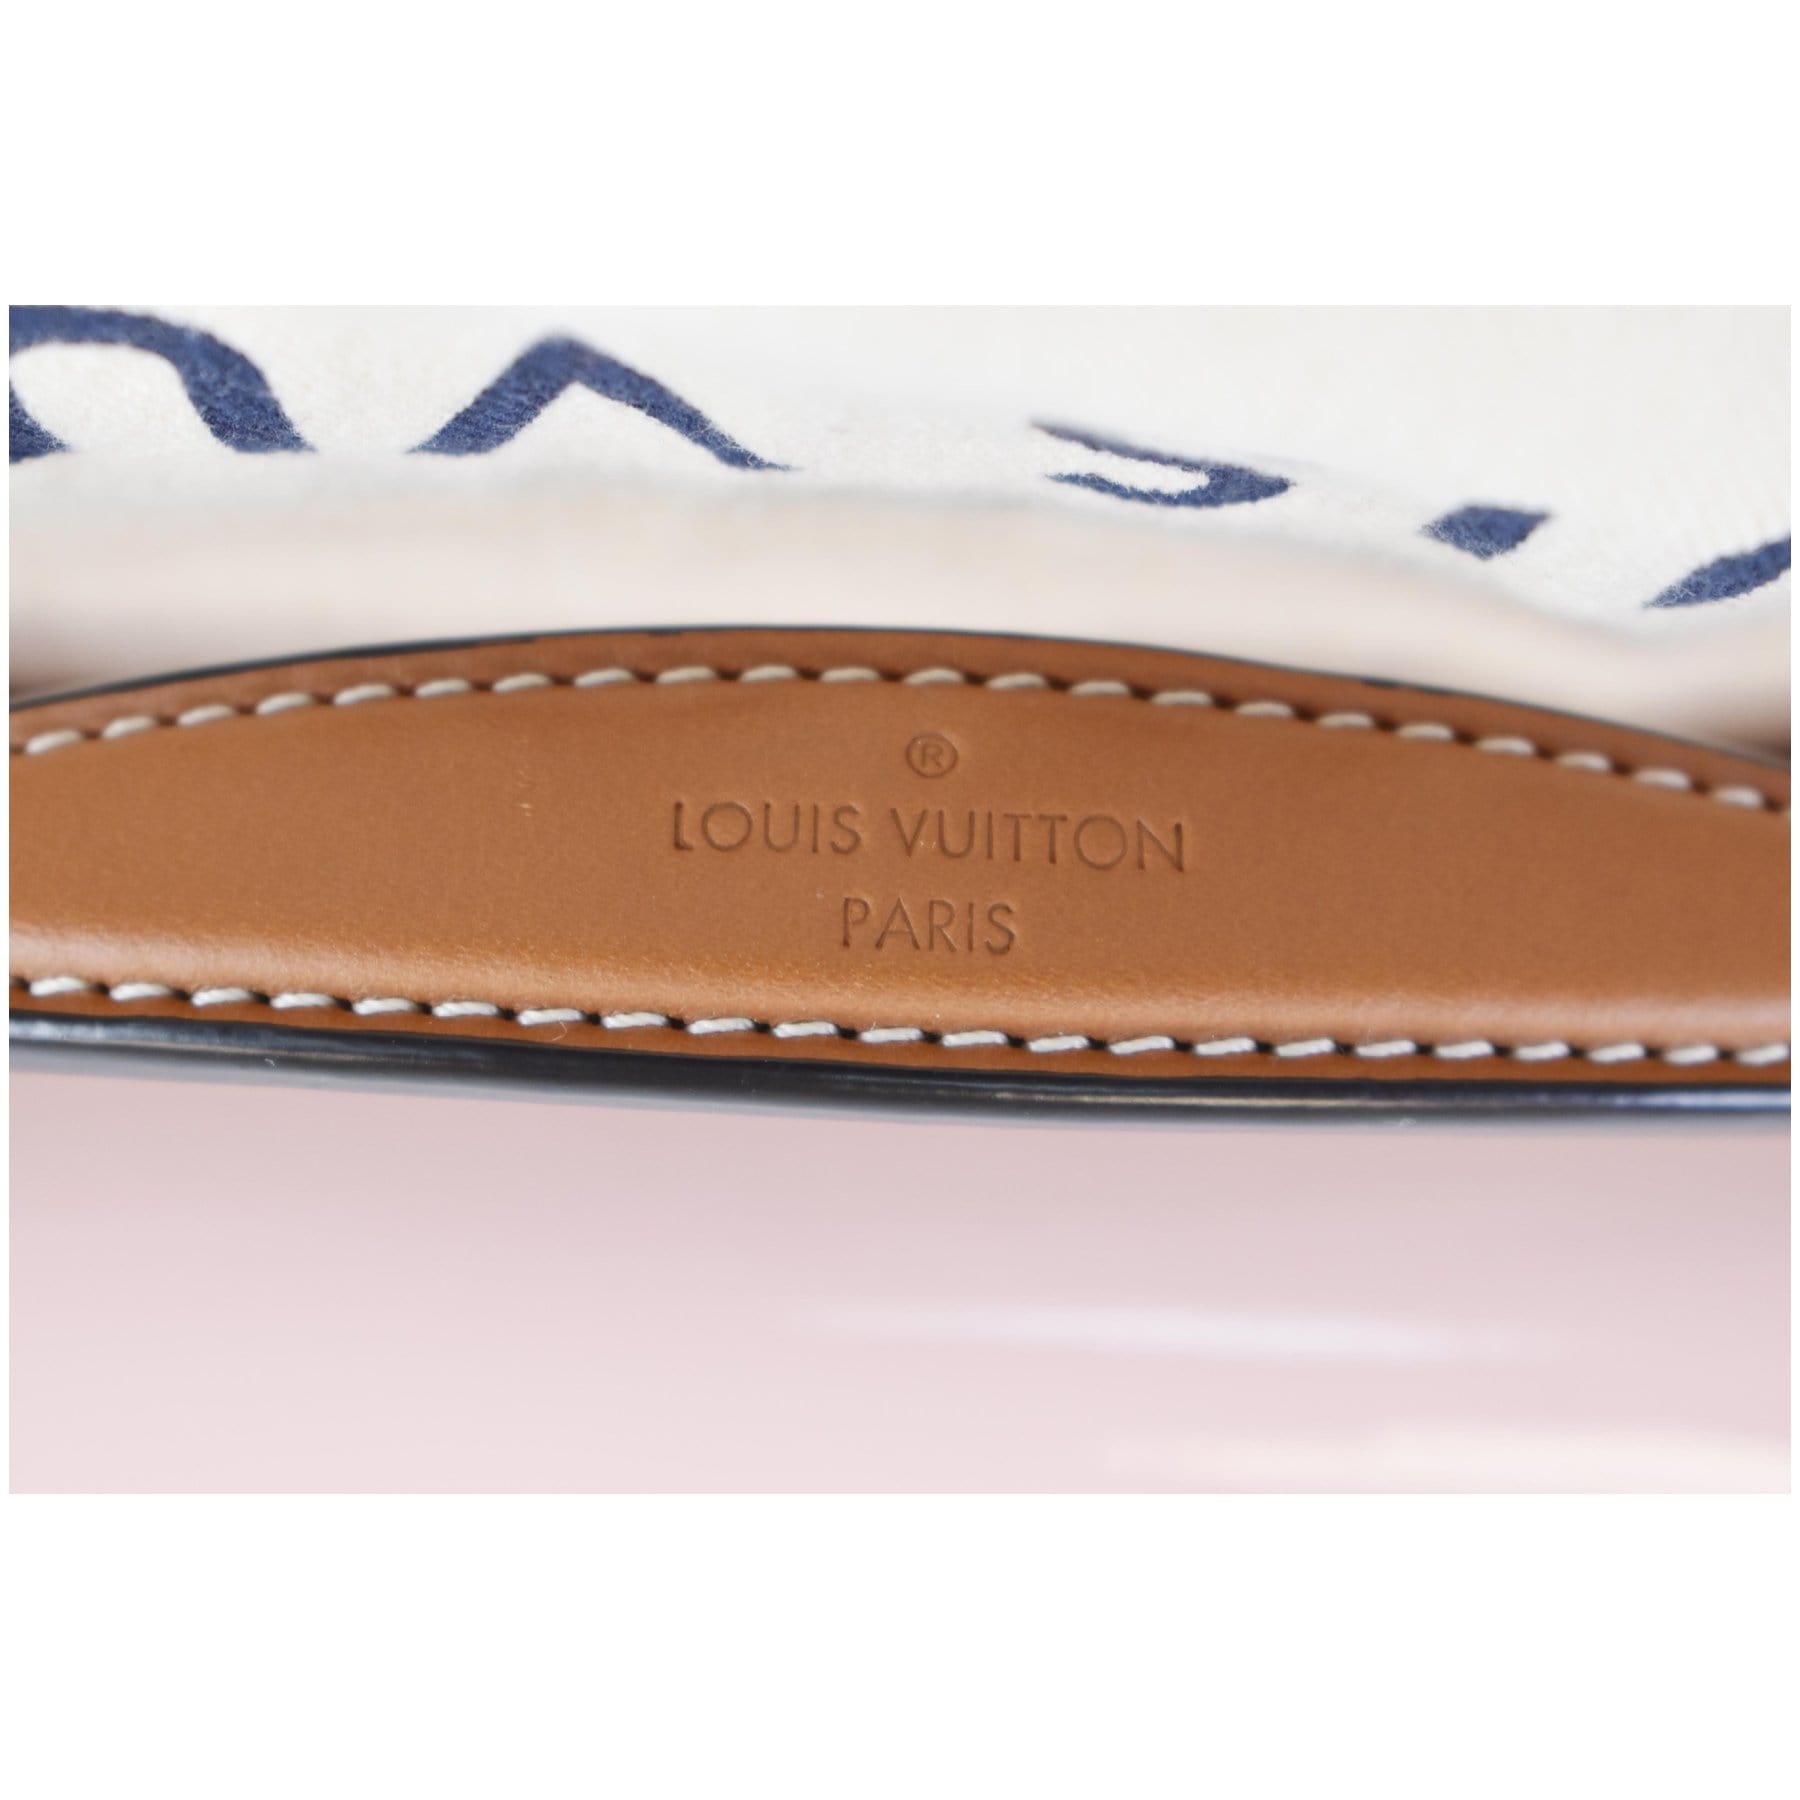 Buy LOUIS VUITTON Portefeuil Cherry Wood M61719 Long Wallet Monogram Vernis  Rose Ballerine (Pink) / 083038 [Used] from Japan - Buy authentic Plus  exclusive items from Japan